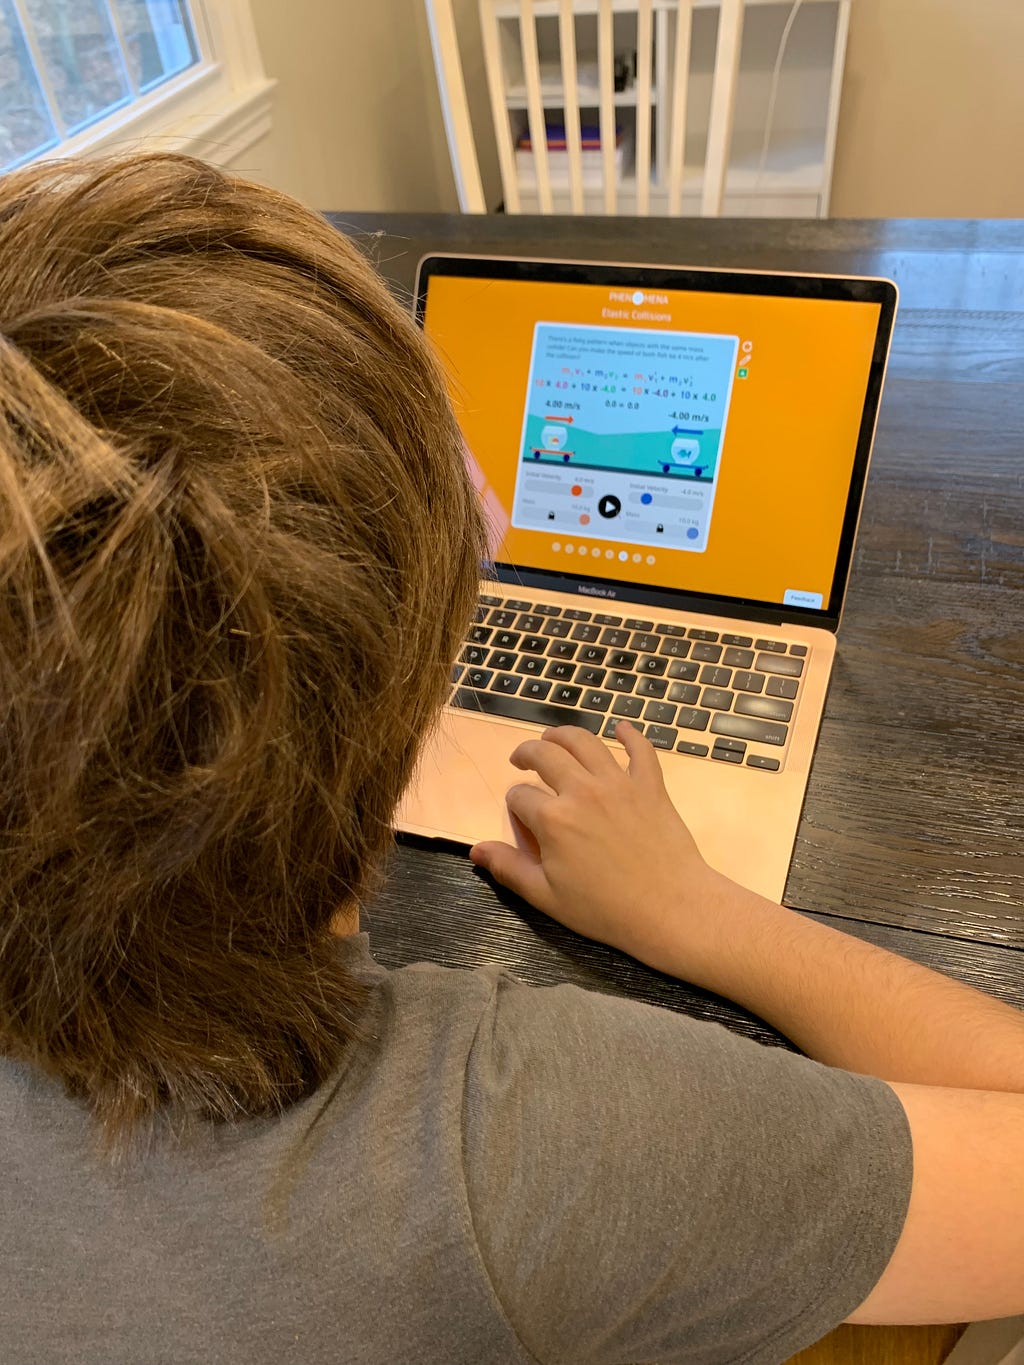 Image shows a child sitting in front of a laptop displaying a Phenomena experience.